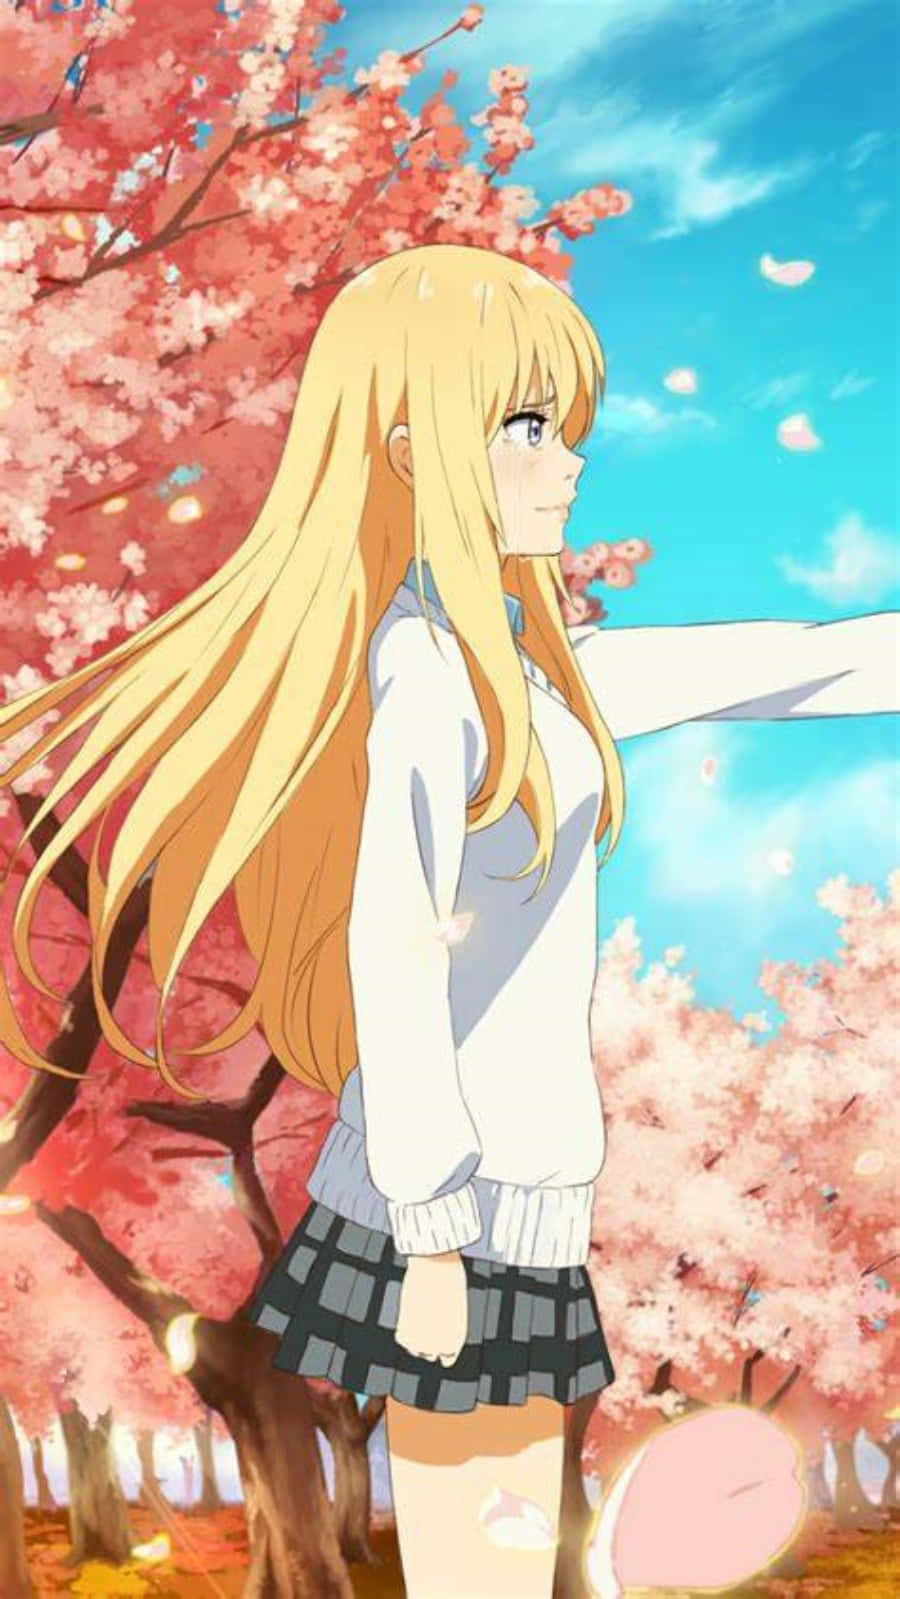 Free Anime Love Wallpaper Downloads, [200+] Anime Love Wallpapers for FREE  